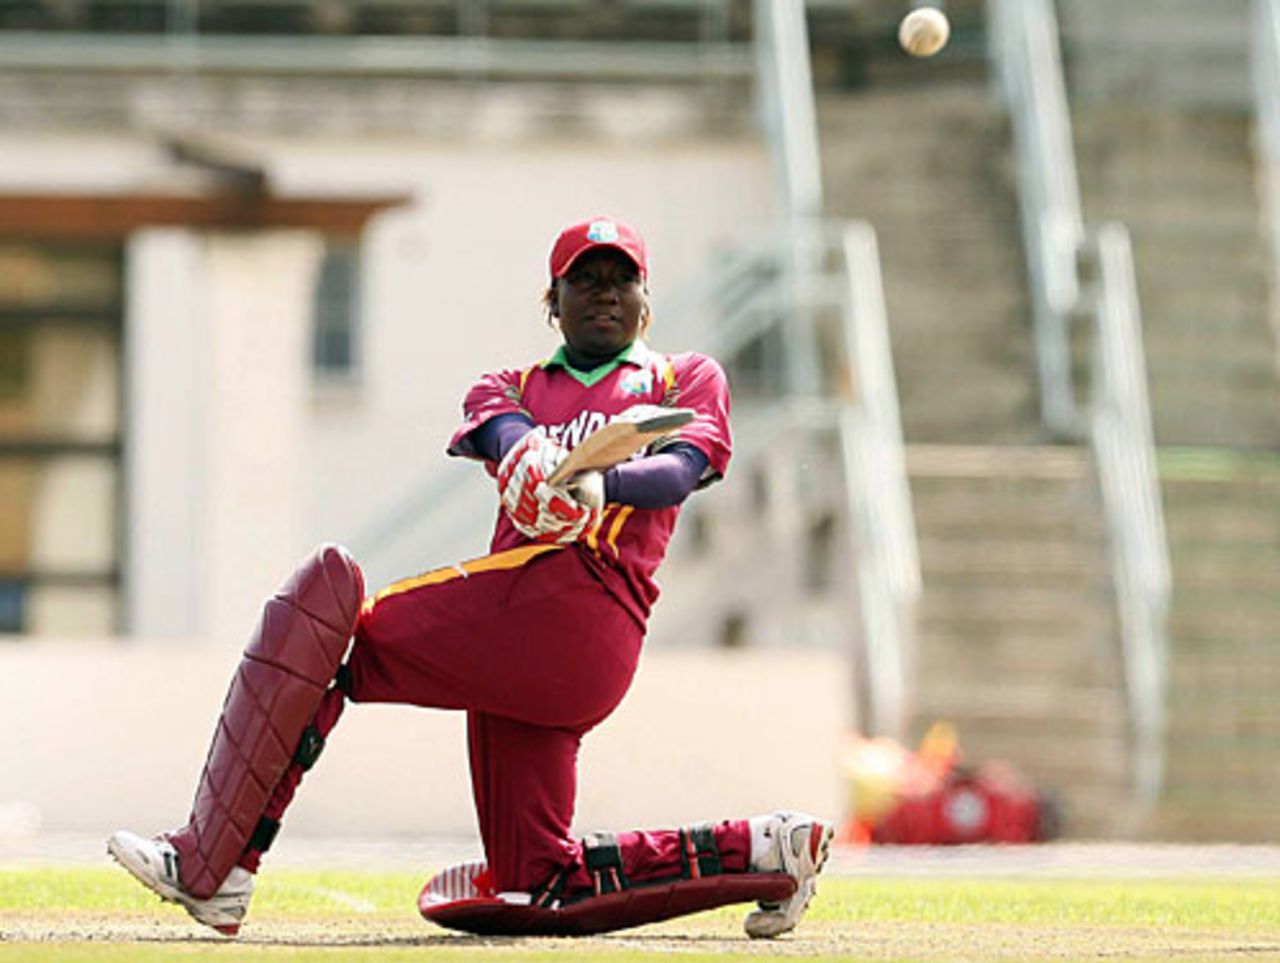 Stafanie Taylor gets down on one knee to smash the ball, South Africa women v West Indies women, 1st ODI, Paarl, October 16, 2009